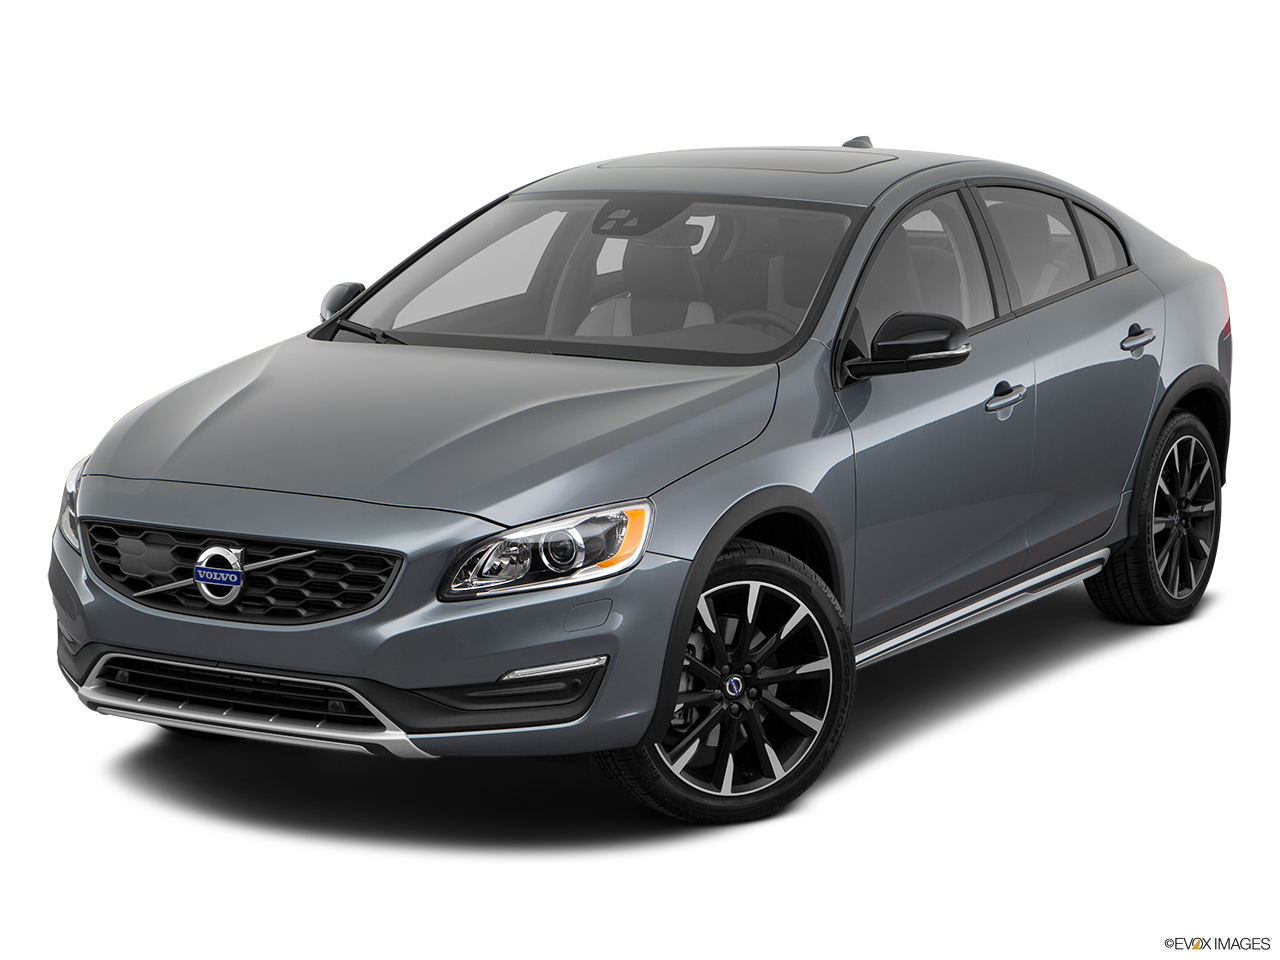 2017 Volvo S60 Cross Country T5 AWD Front angle view. 